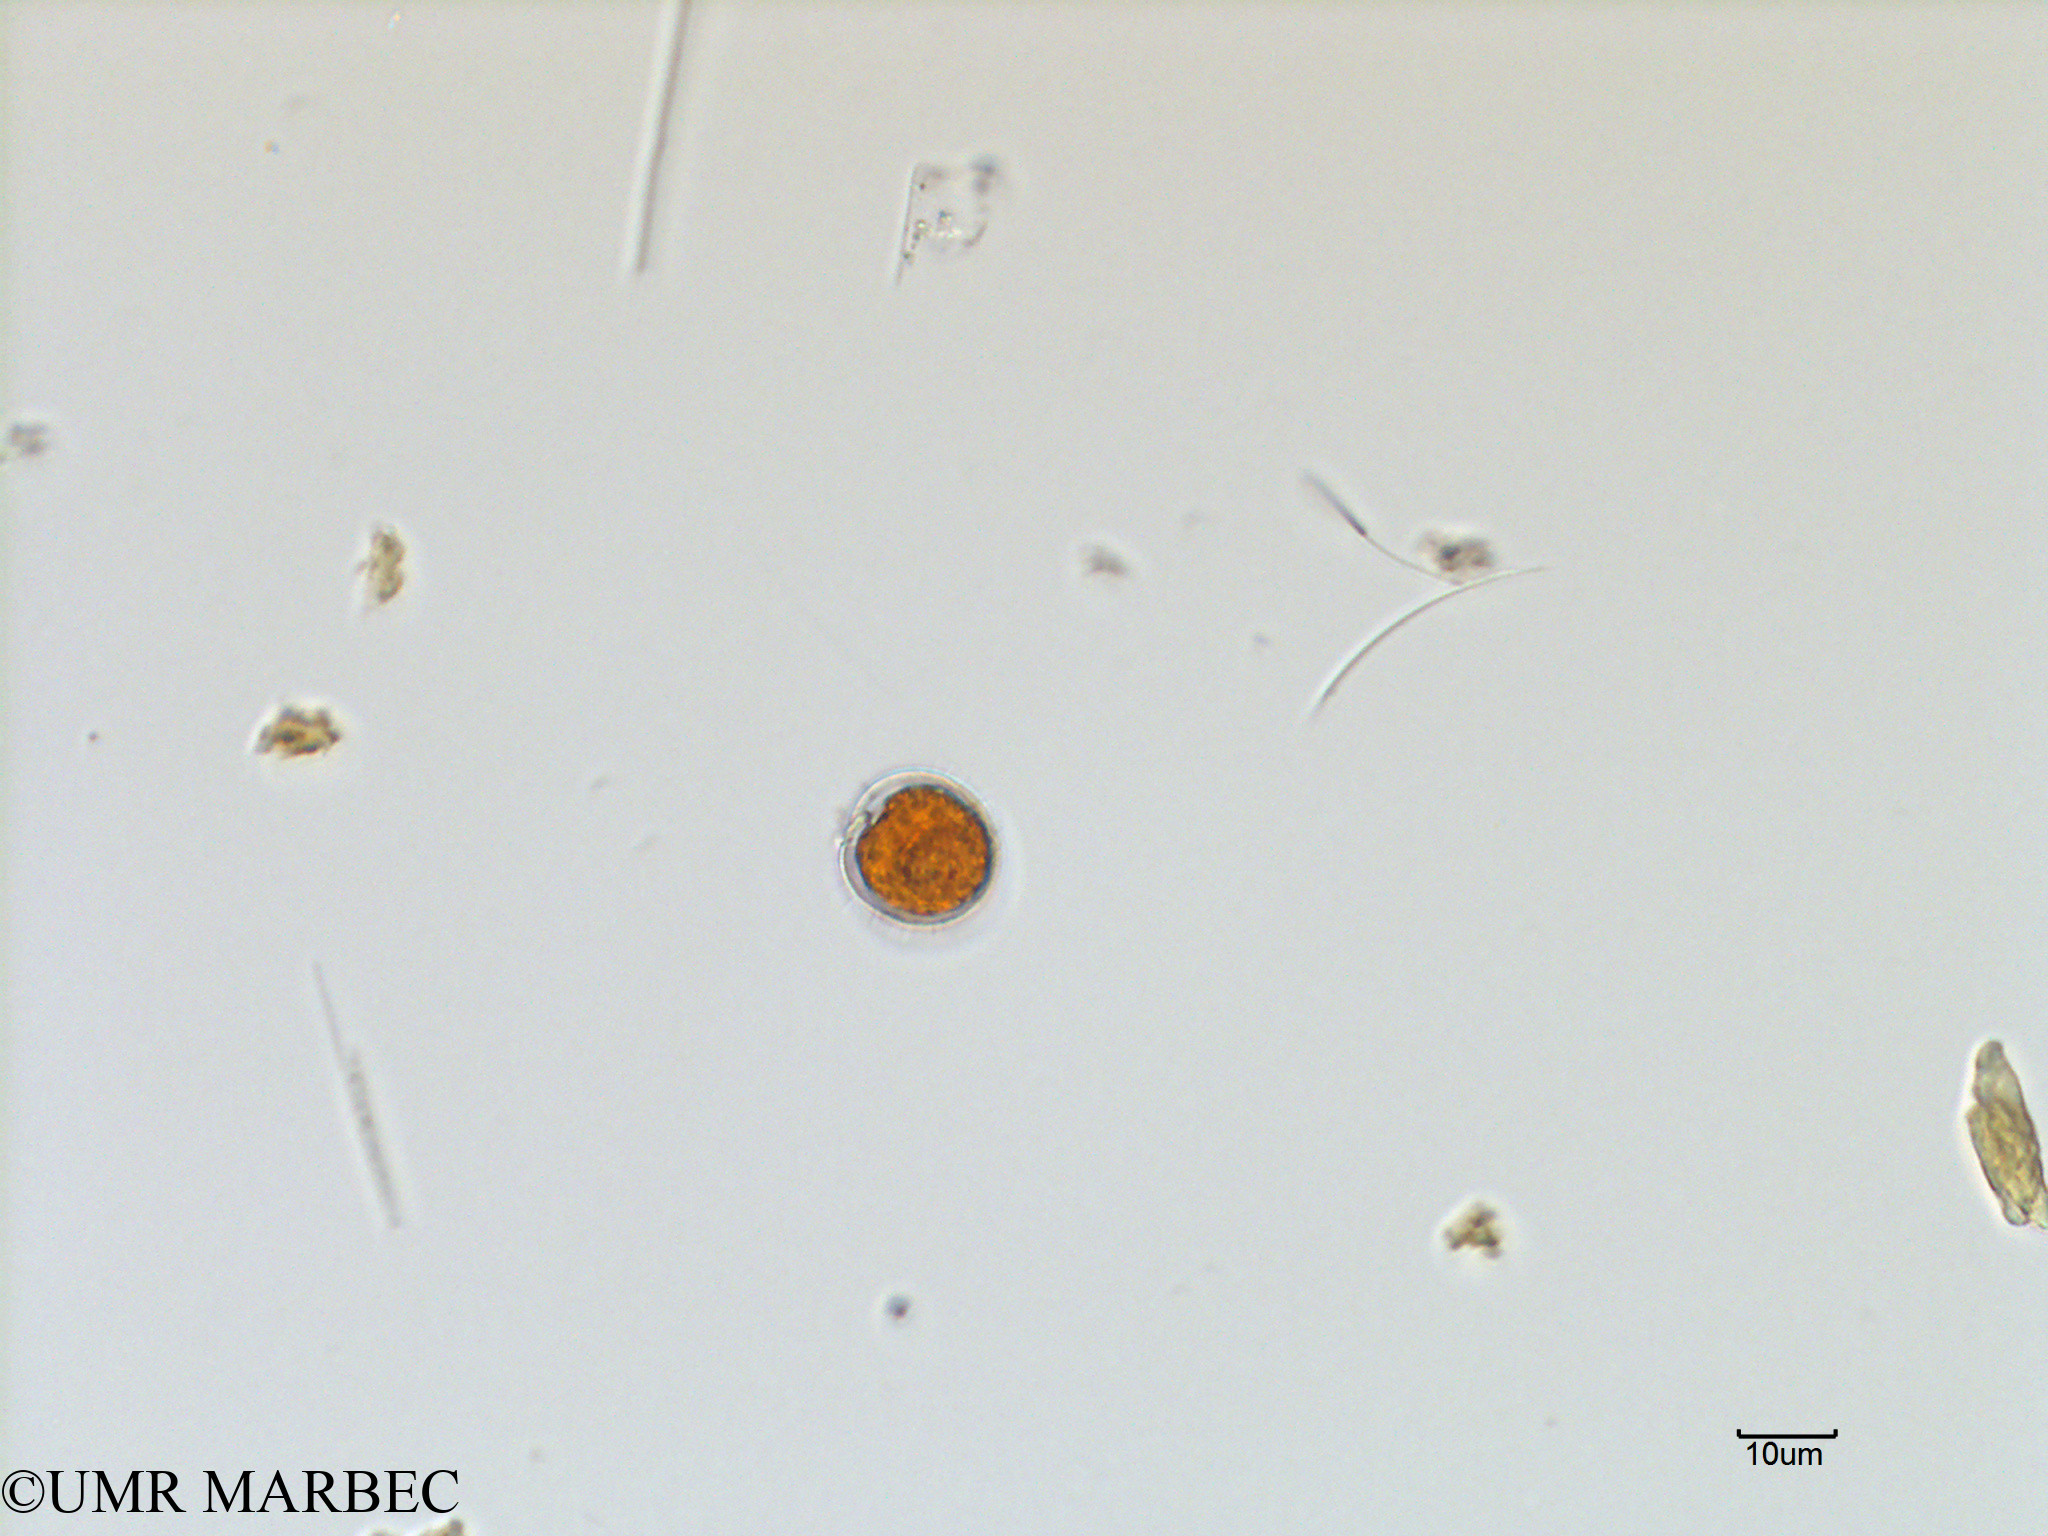 phyto/Scattered_Islands/mayotte_lagoon/SIREME May 2016/Protoperidinium sp52 (MAY3_oblea 1-7).tif(copy).jpg